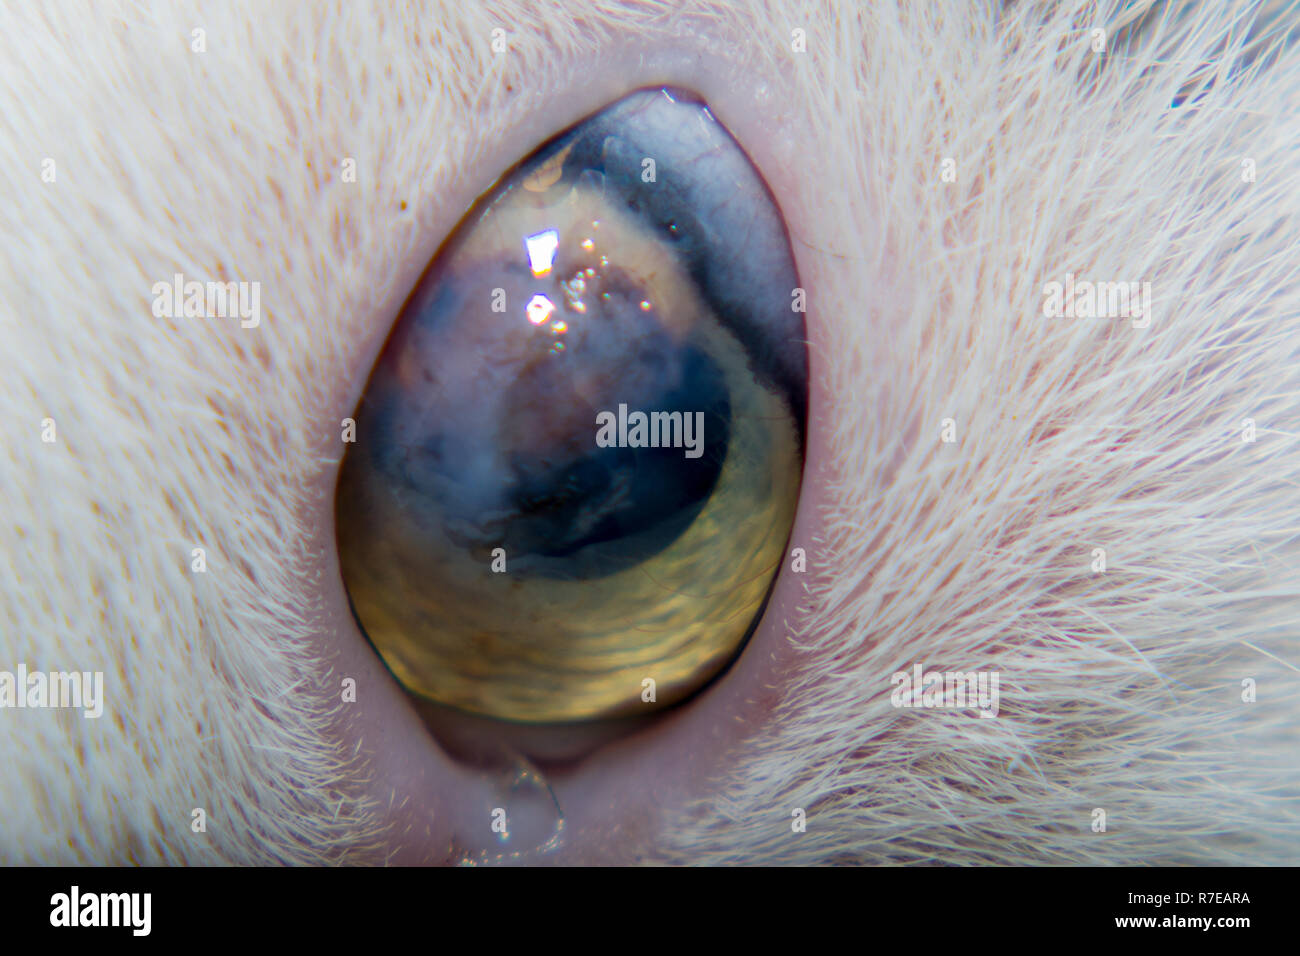 Adult cat with corneal ulcer Stock Photo